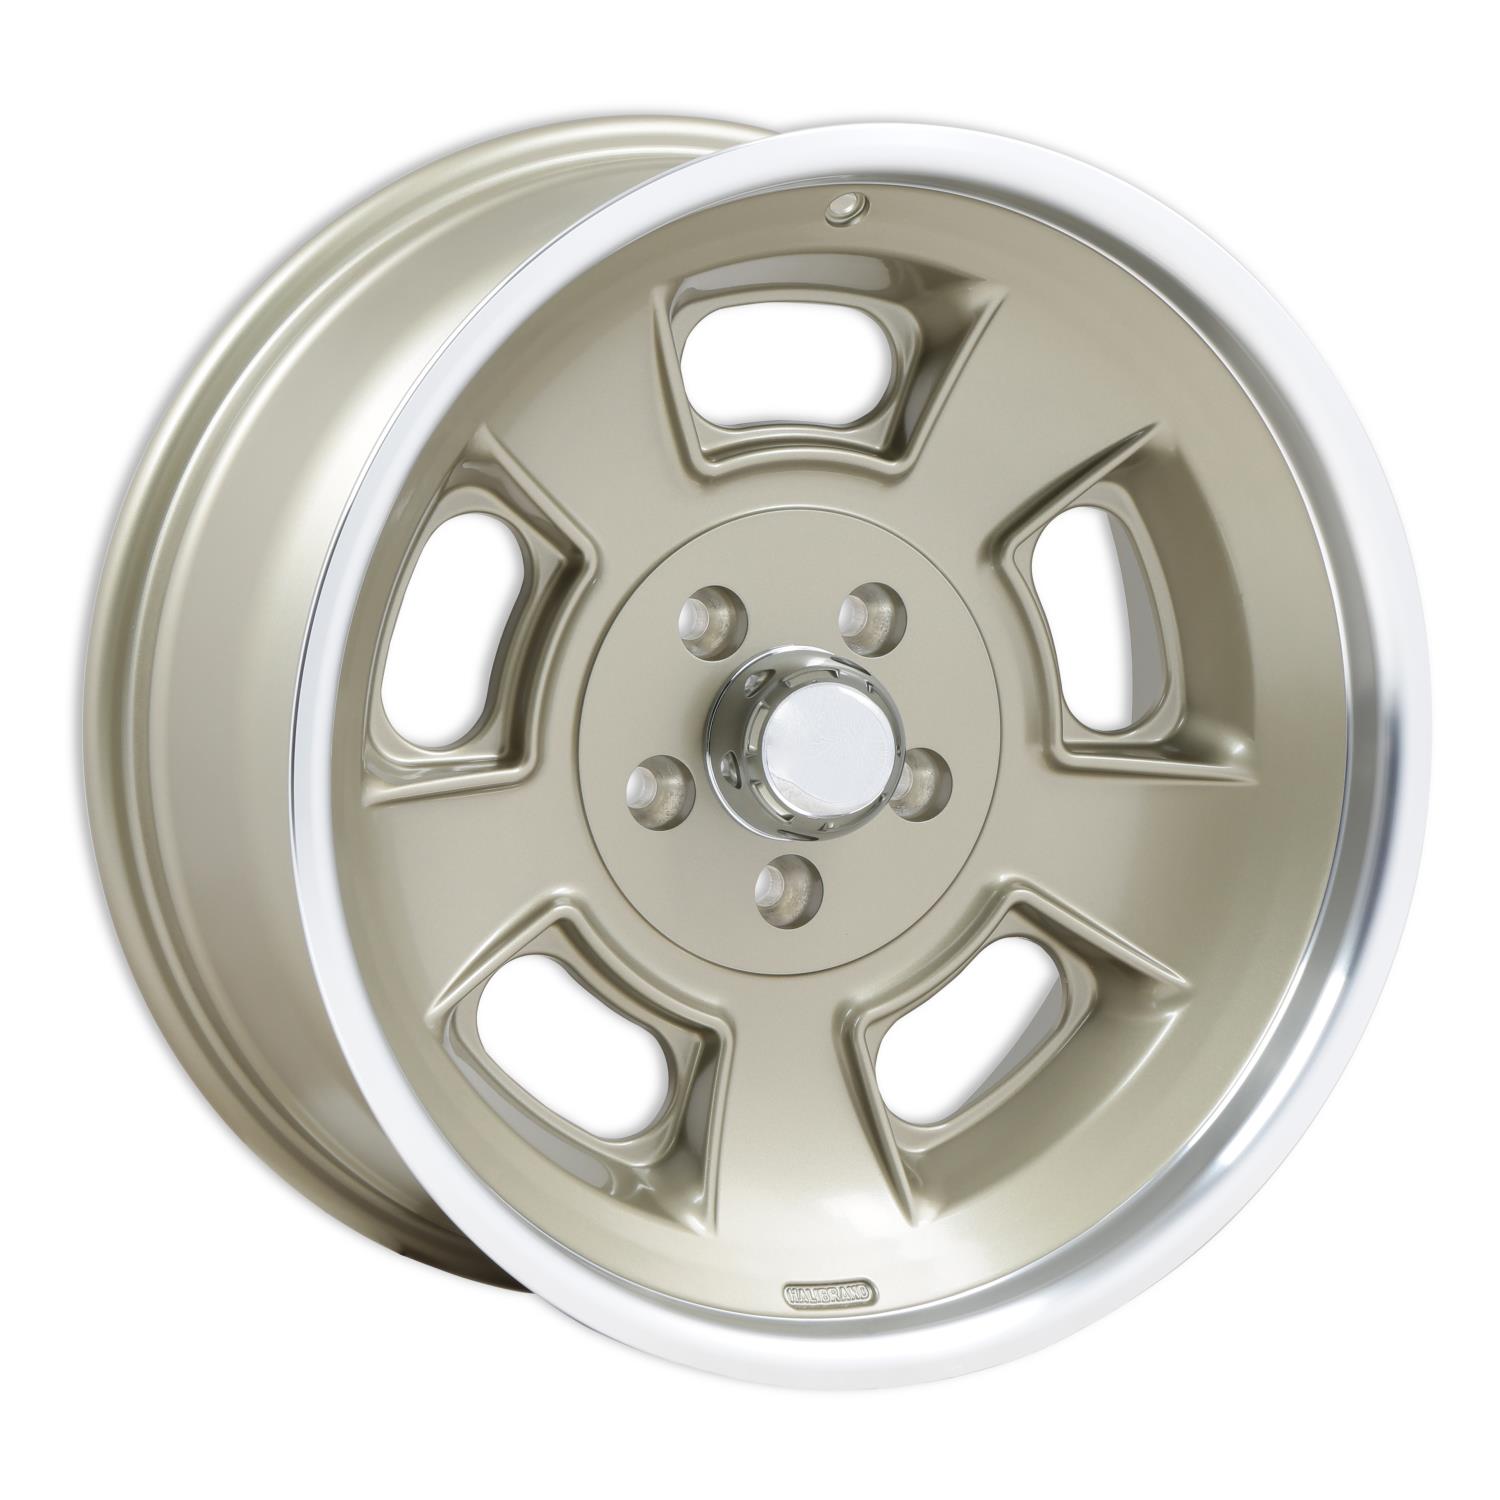 Sprint Front Wheel, Size: 19x8.5", Bolt Pattern: 5x5", Backspace: 4.5" [MAG7 with Machined Lip - Semi Gloss Clearcoat]